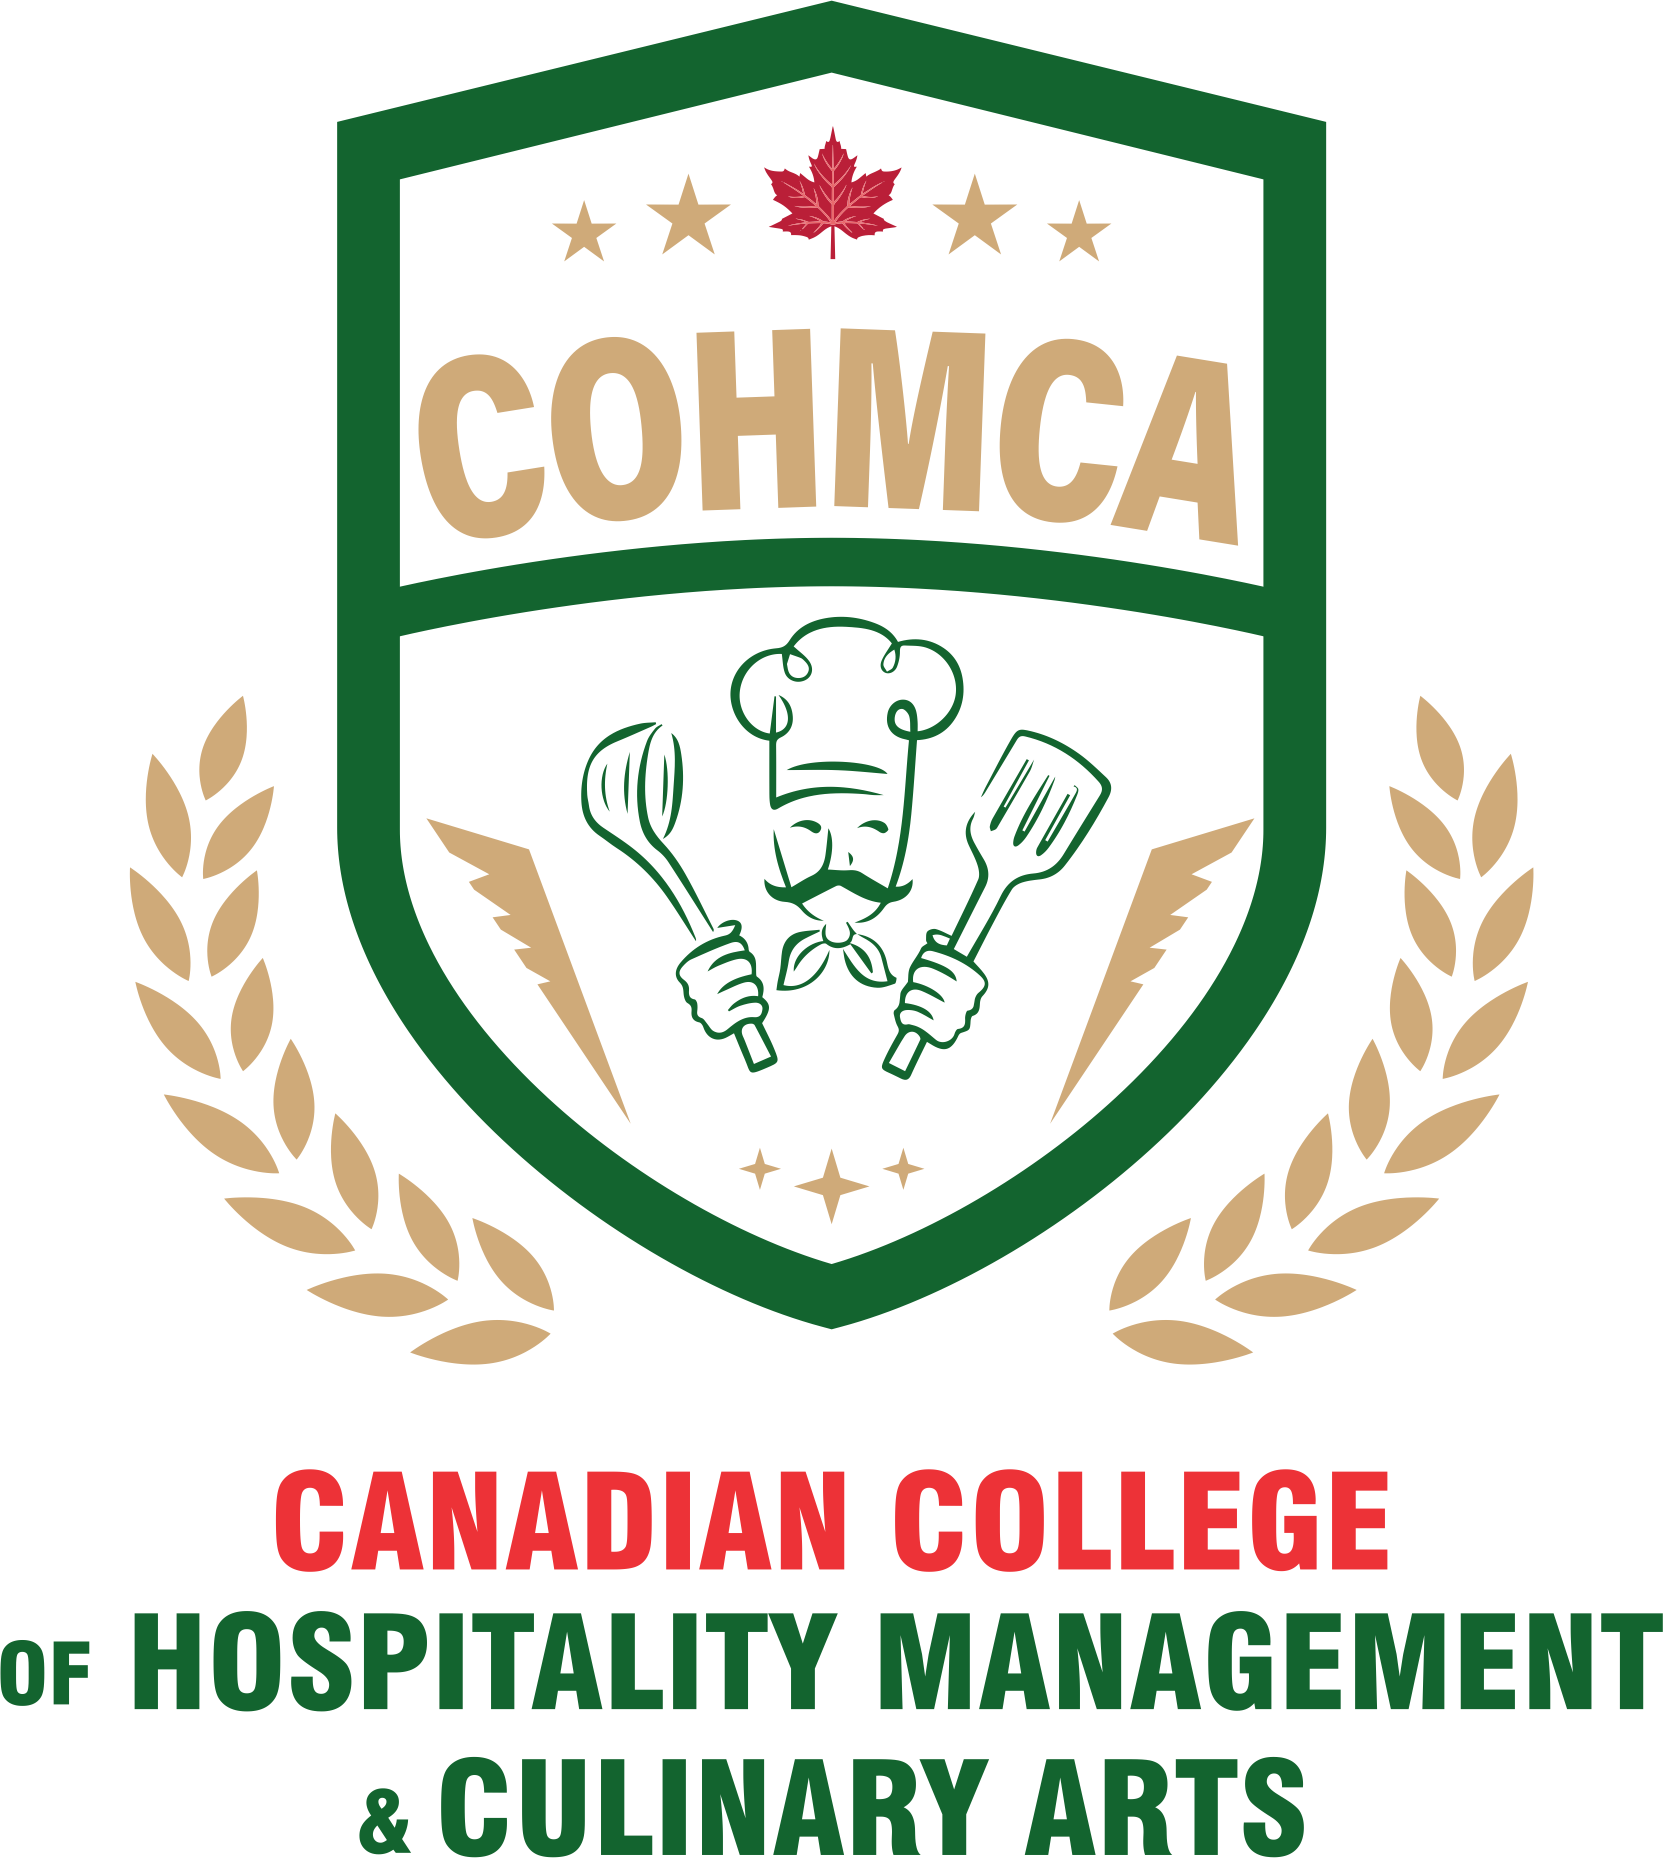 Canadian College of Hospitality Management & Culinary Arts